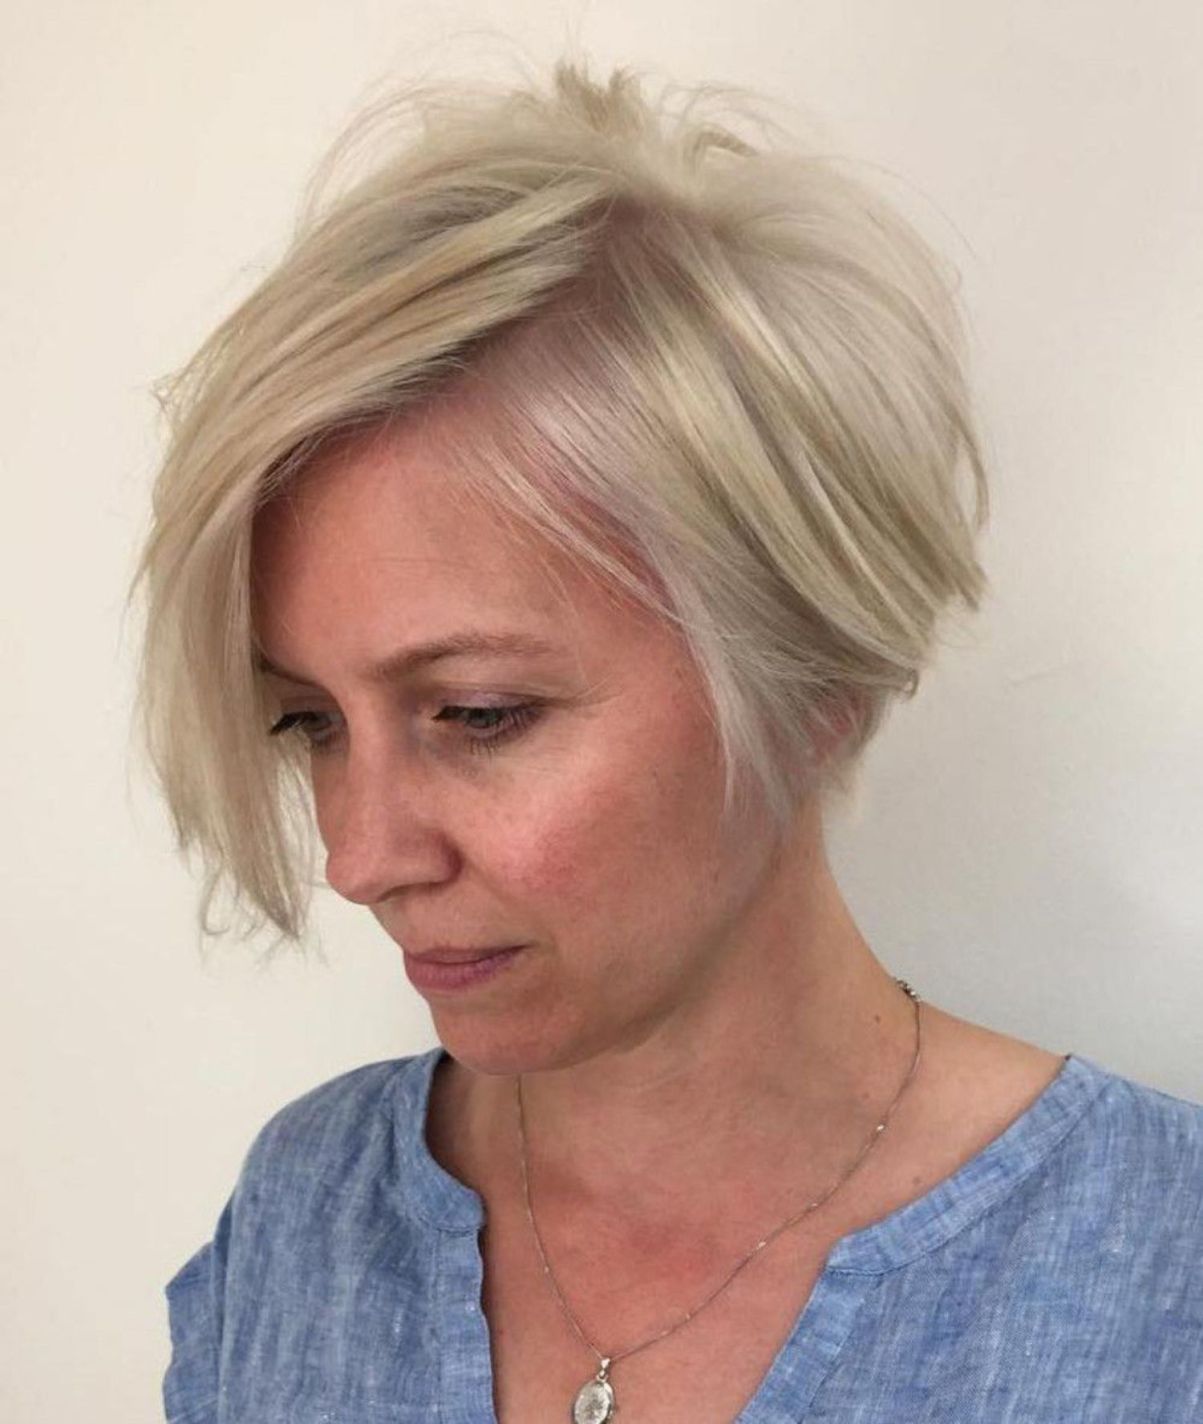 80 Best Modern Hairstyles and Haircuts for Women Over 50